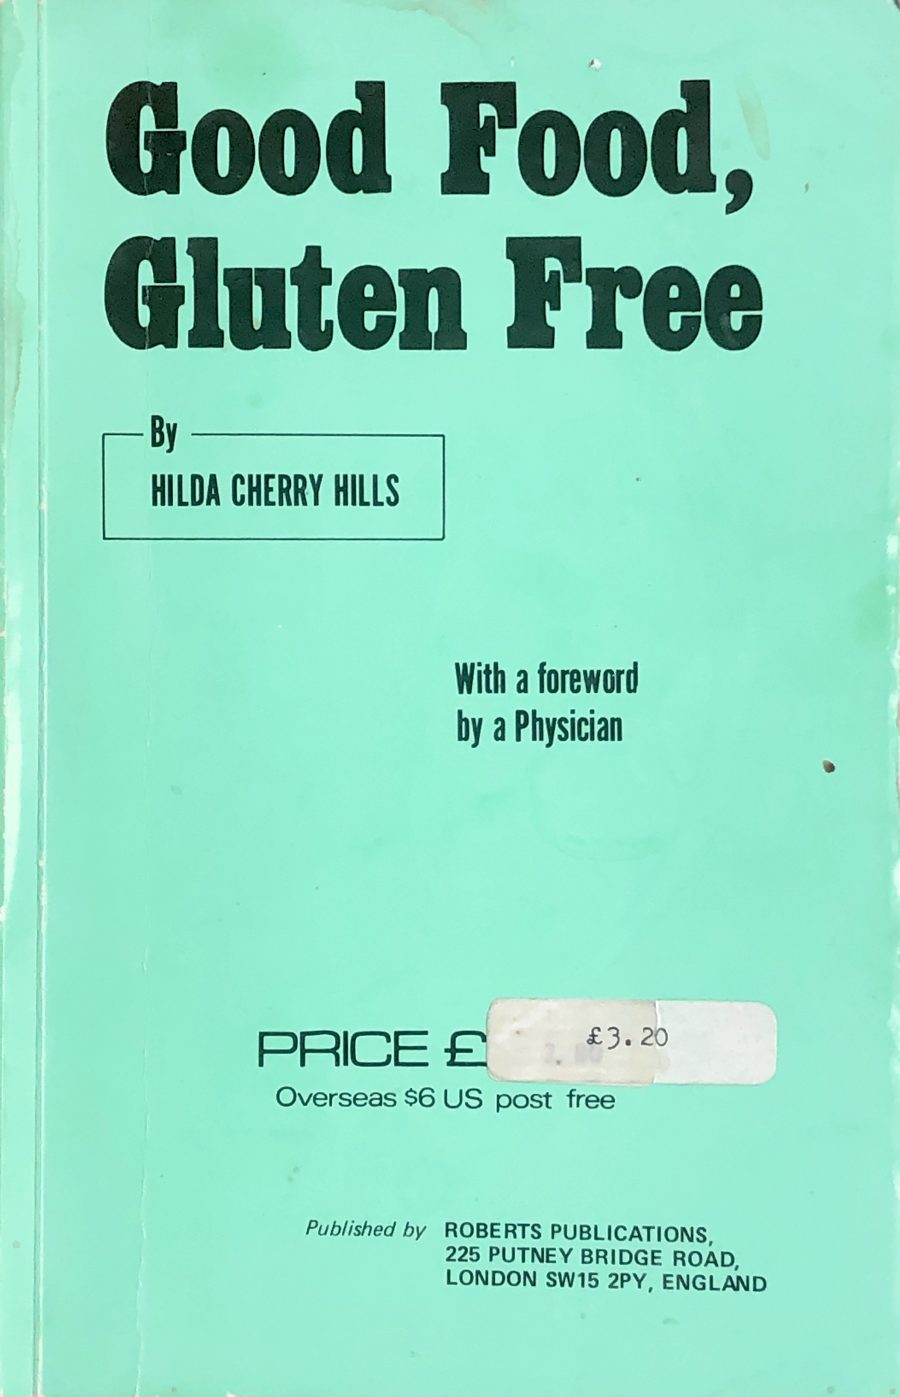 The turquoise cover of “Good Food, Gluten Free”, a cookbook by Hilda Cherry Hills published in the 70s